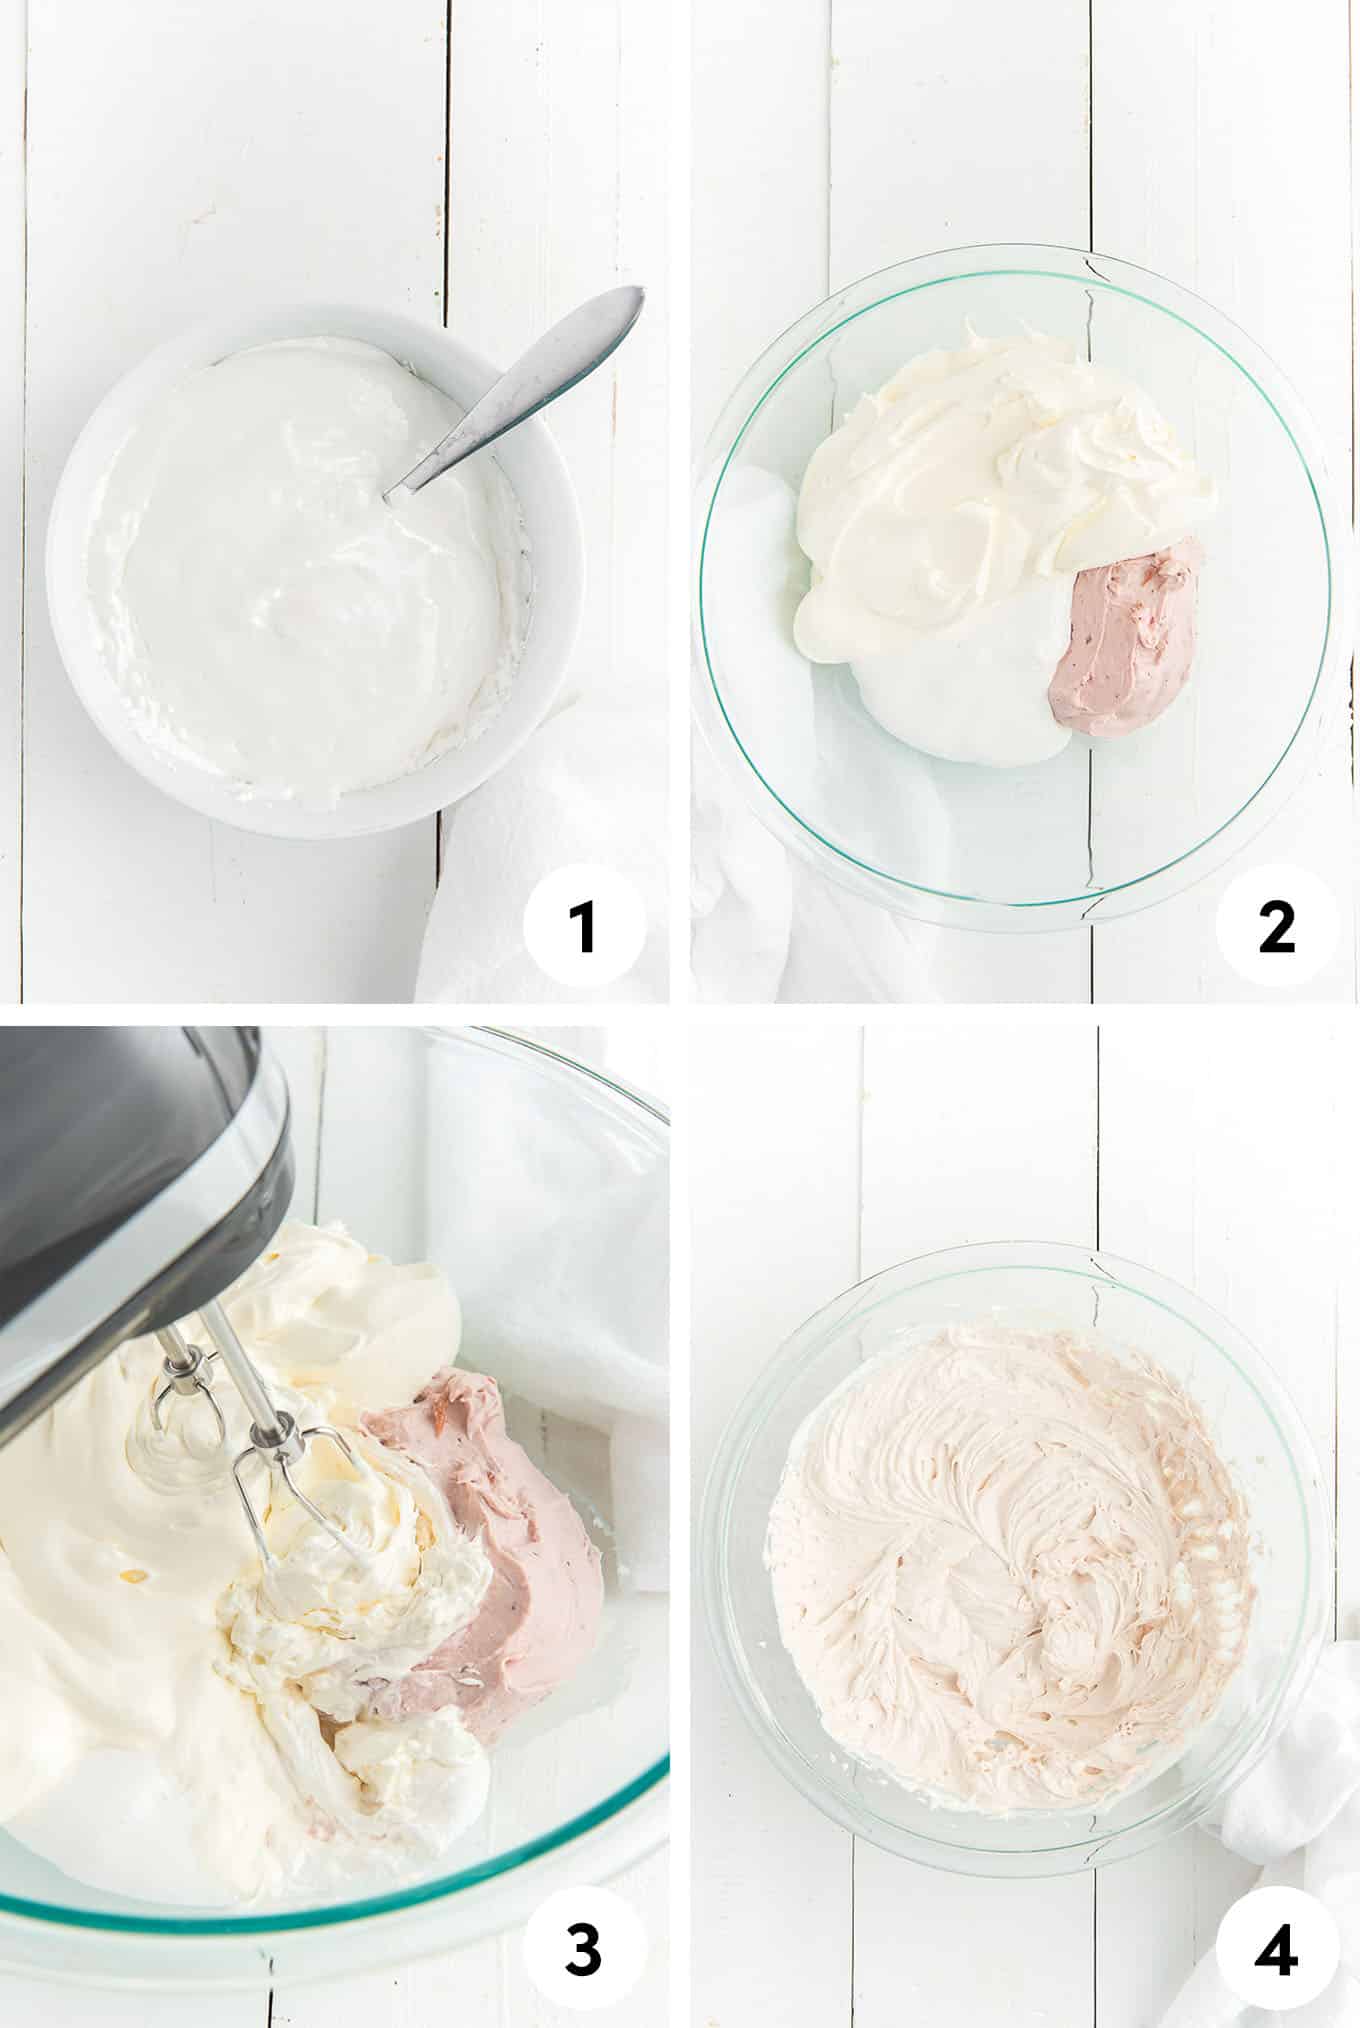 Step by step process photos for fruit dip.